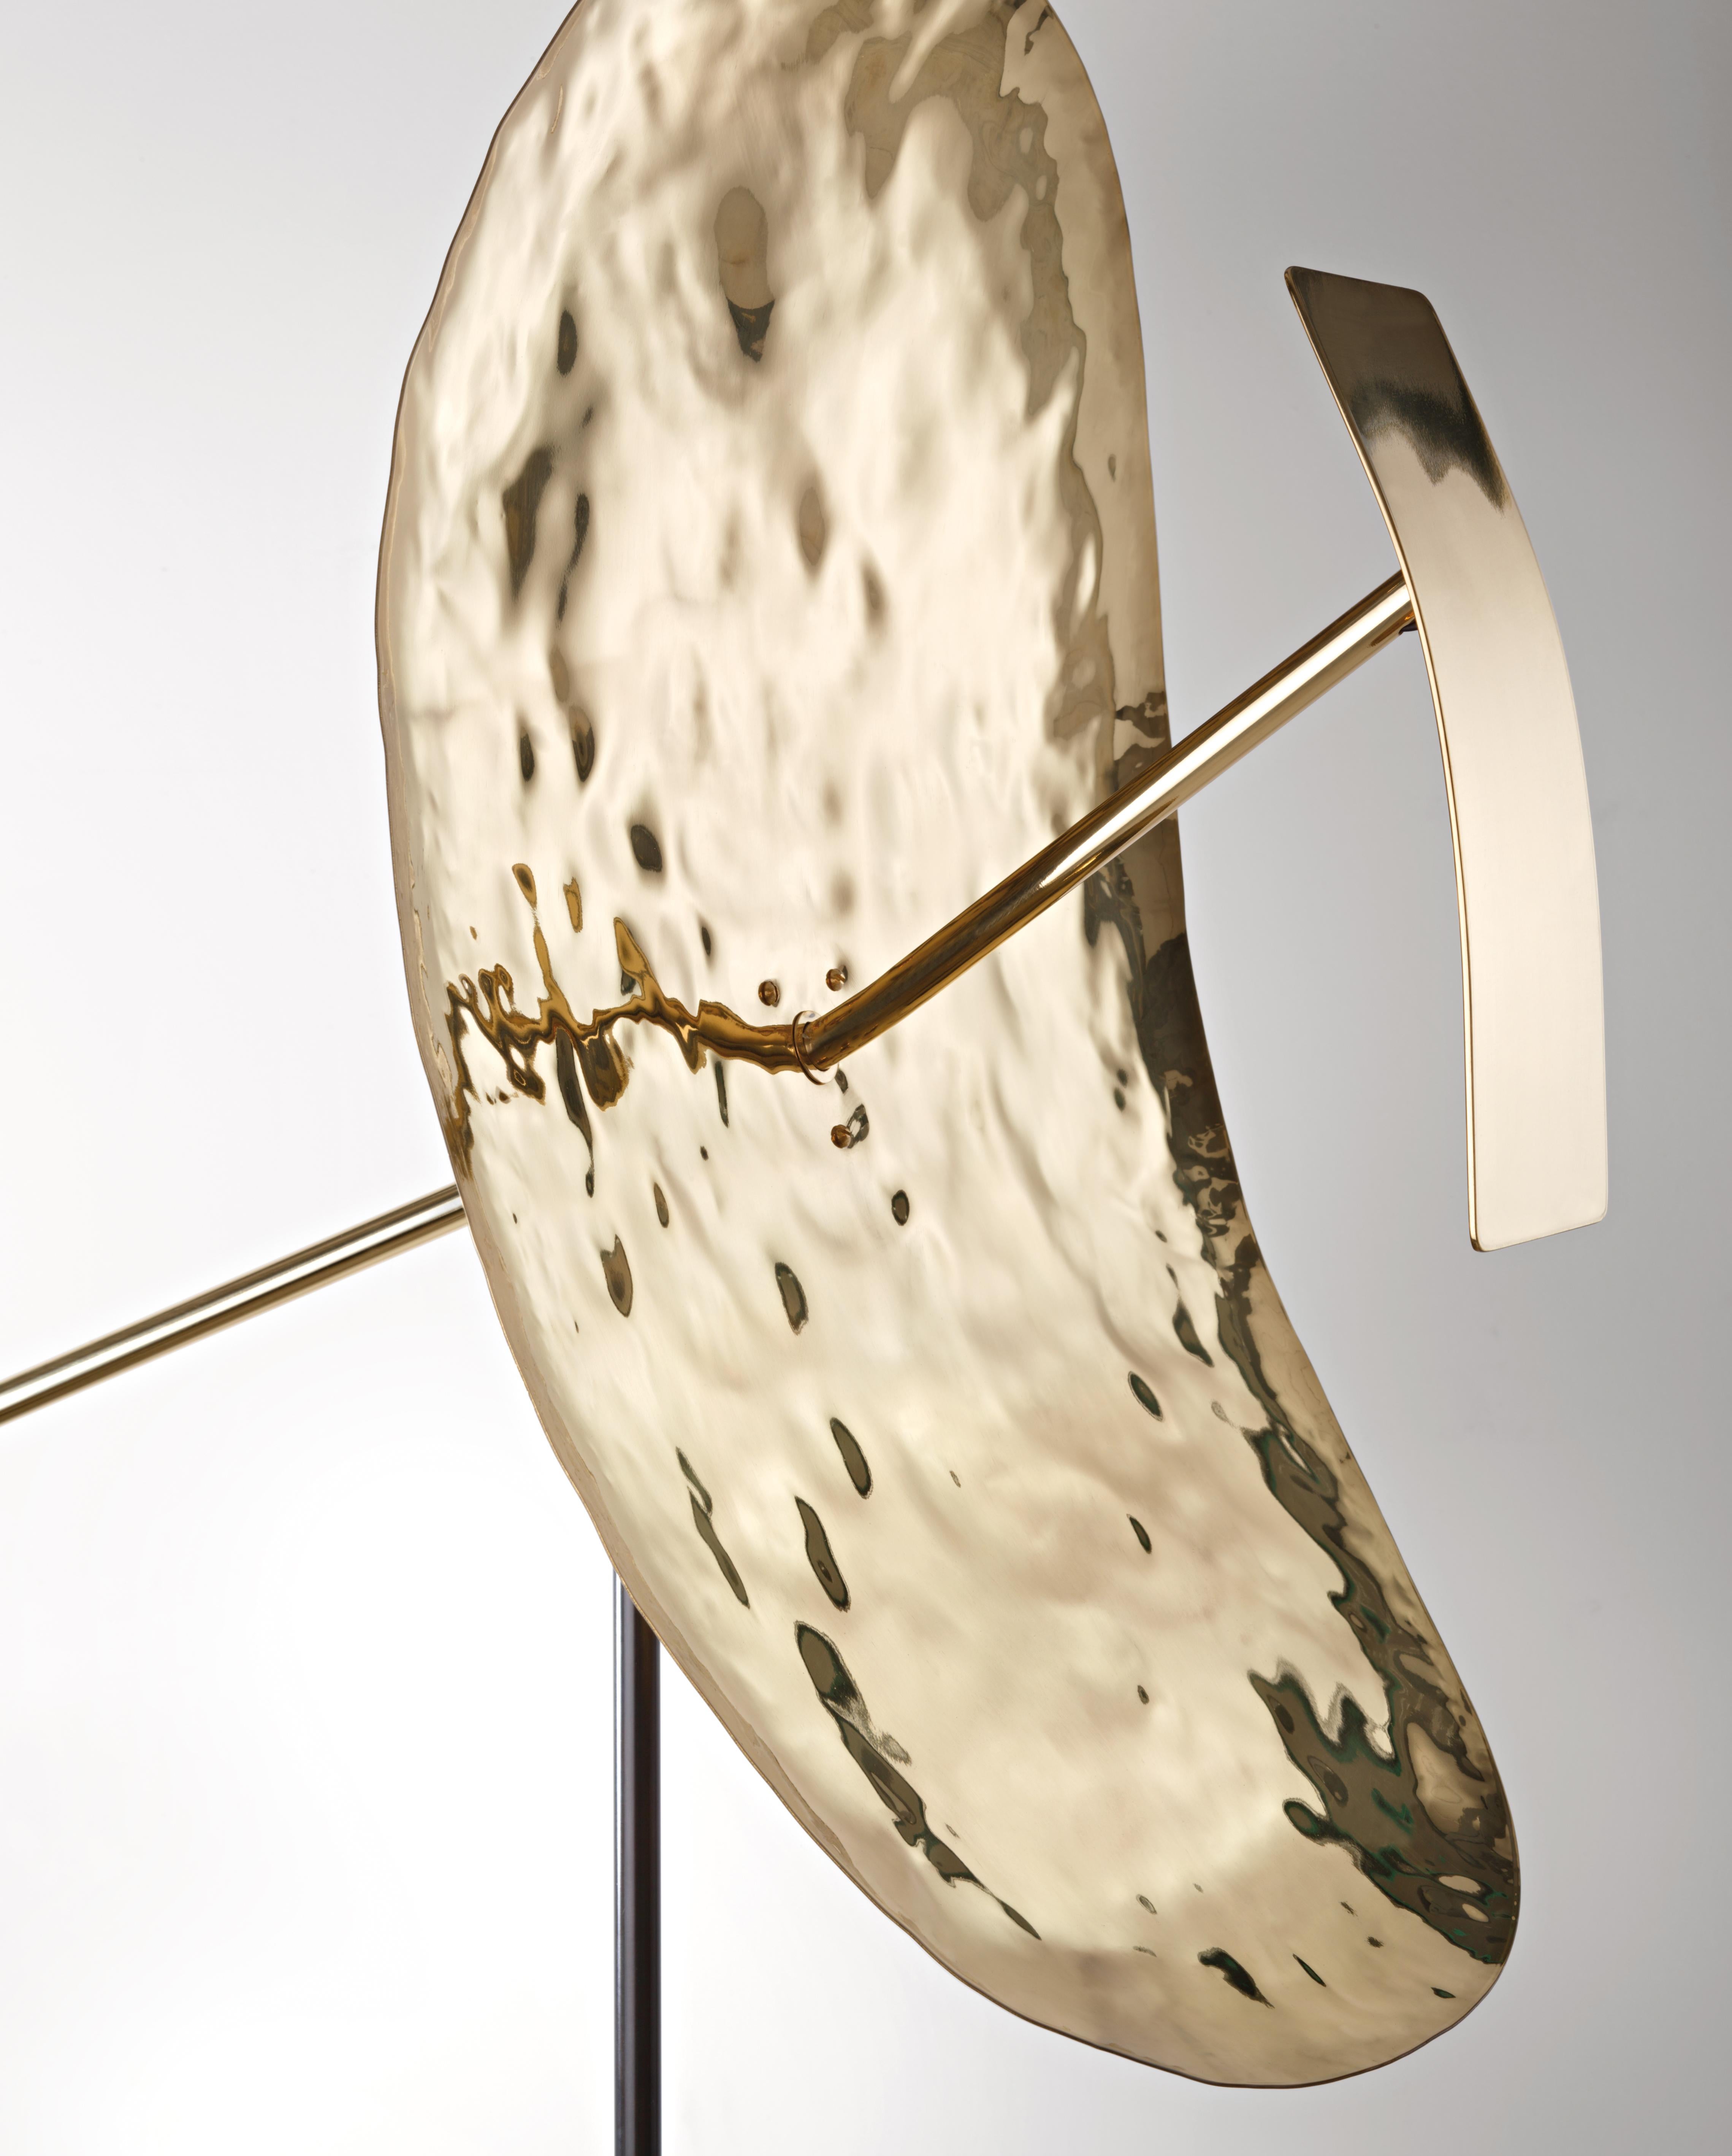 Modern DeCastelli Ribot Lamp in Brass with Iron Base by Alessandro Mason For Sale